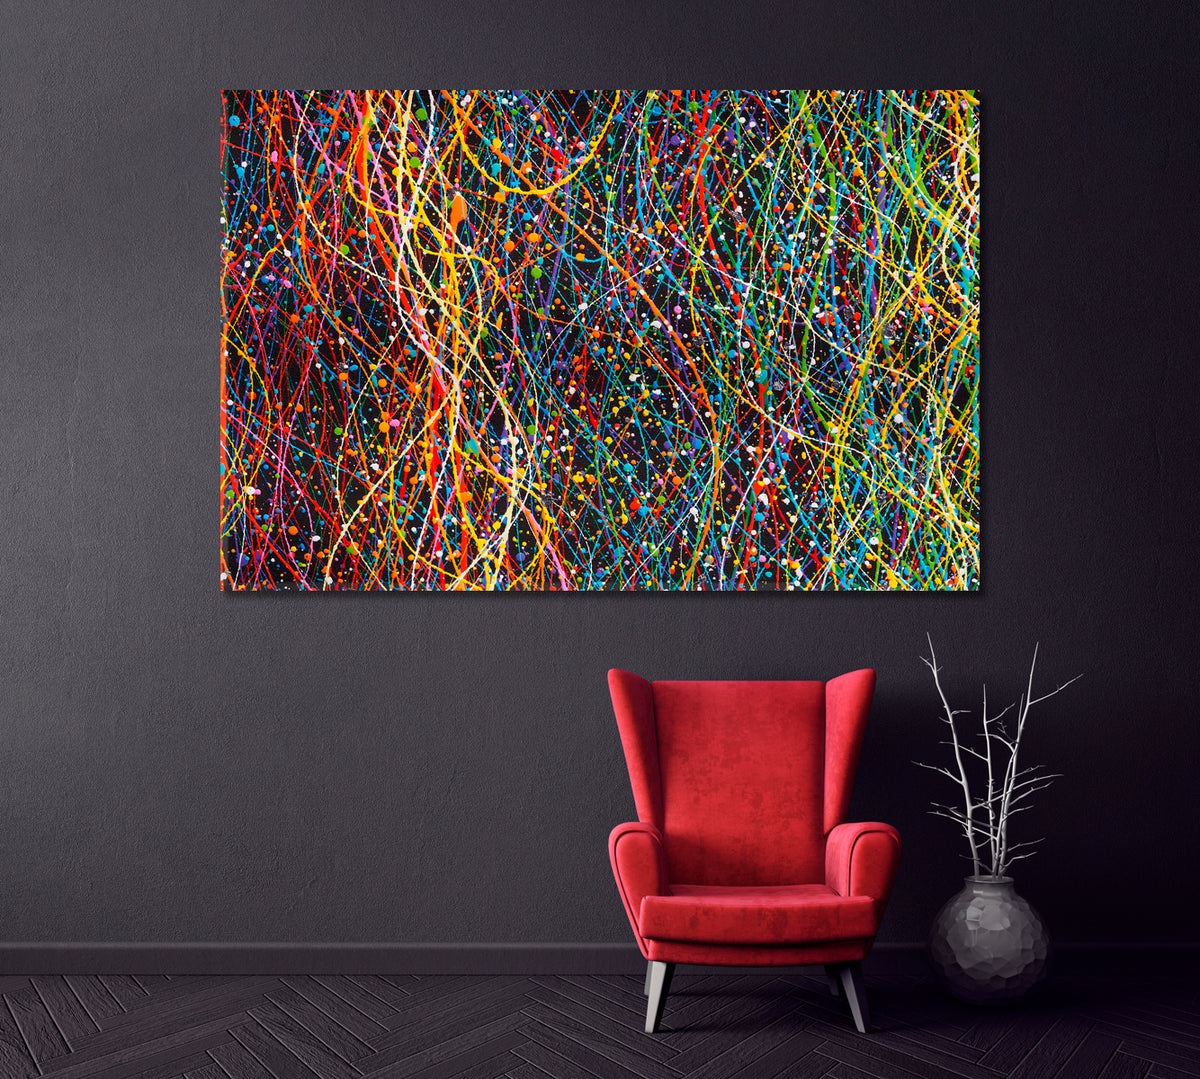 Splash of Colorful Ink Canvas Print ArtLexy 1 Panel 24"x16" inches 